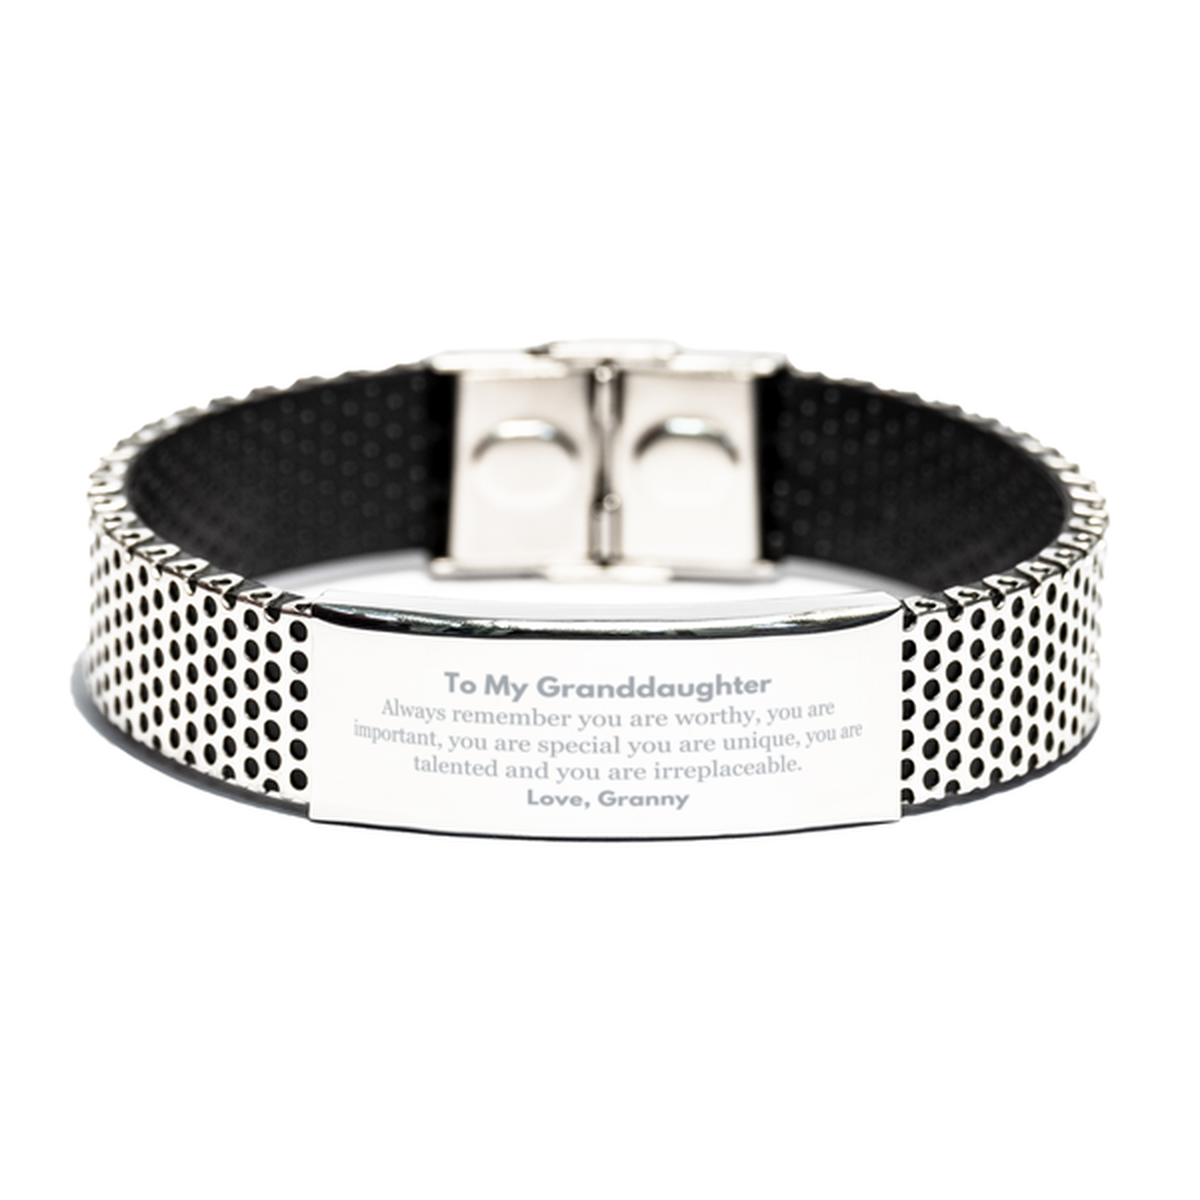 Granddaughter Birthday Gifts from Granny, Inspirational Stainless Steel Bracelet for Granddaughter Christmas Graduation Gifts for Granddaughter Always remember you are worthy, you are important. Love, Granny